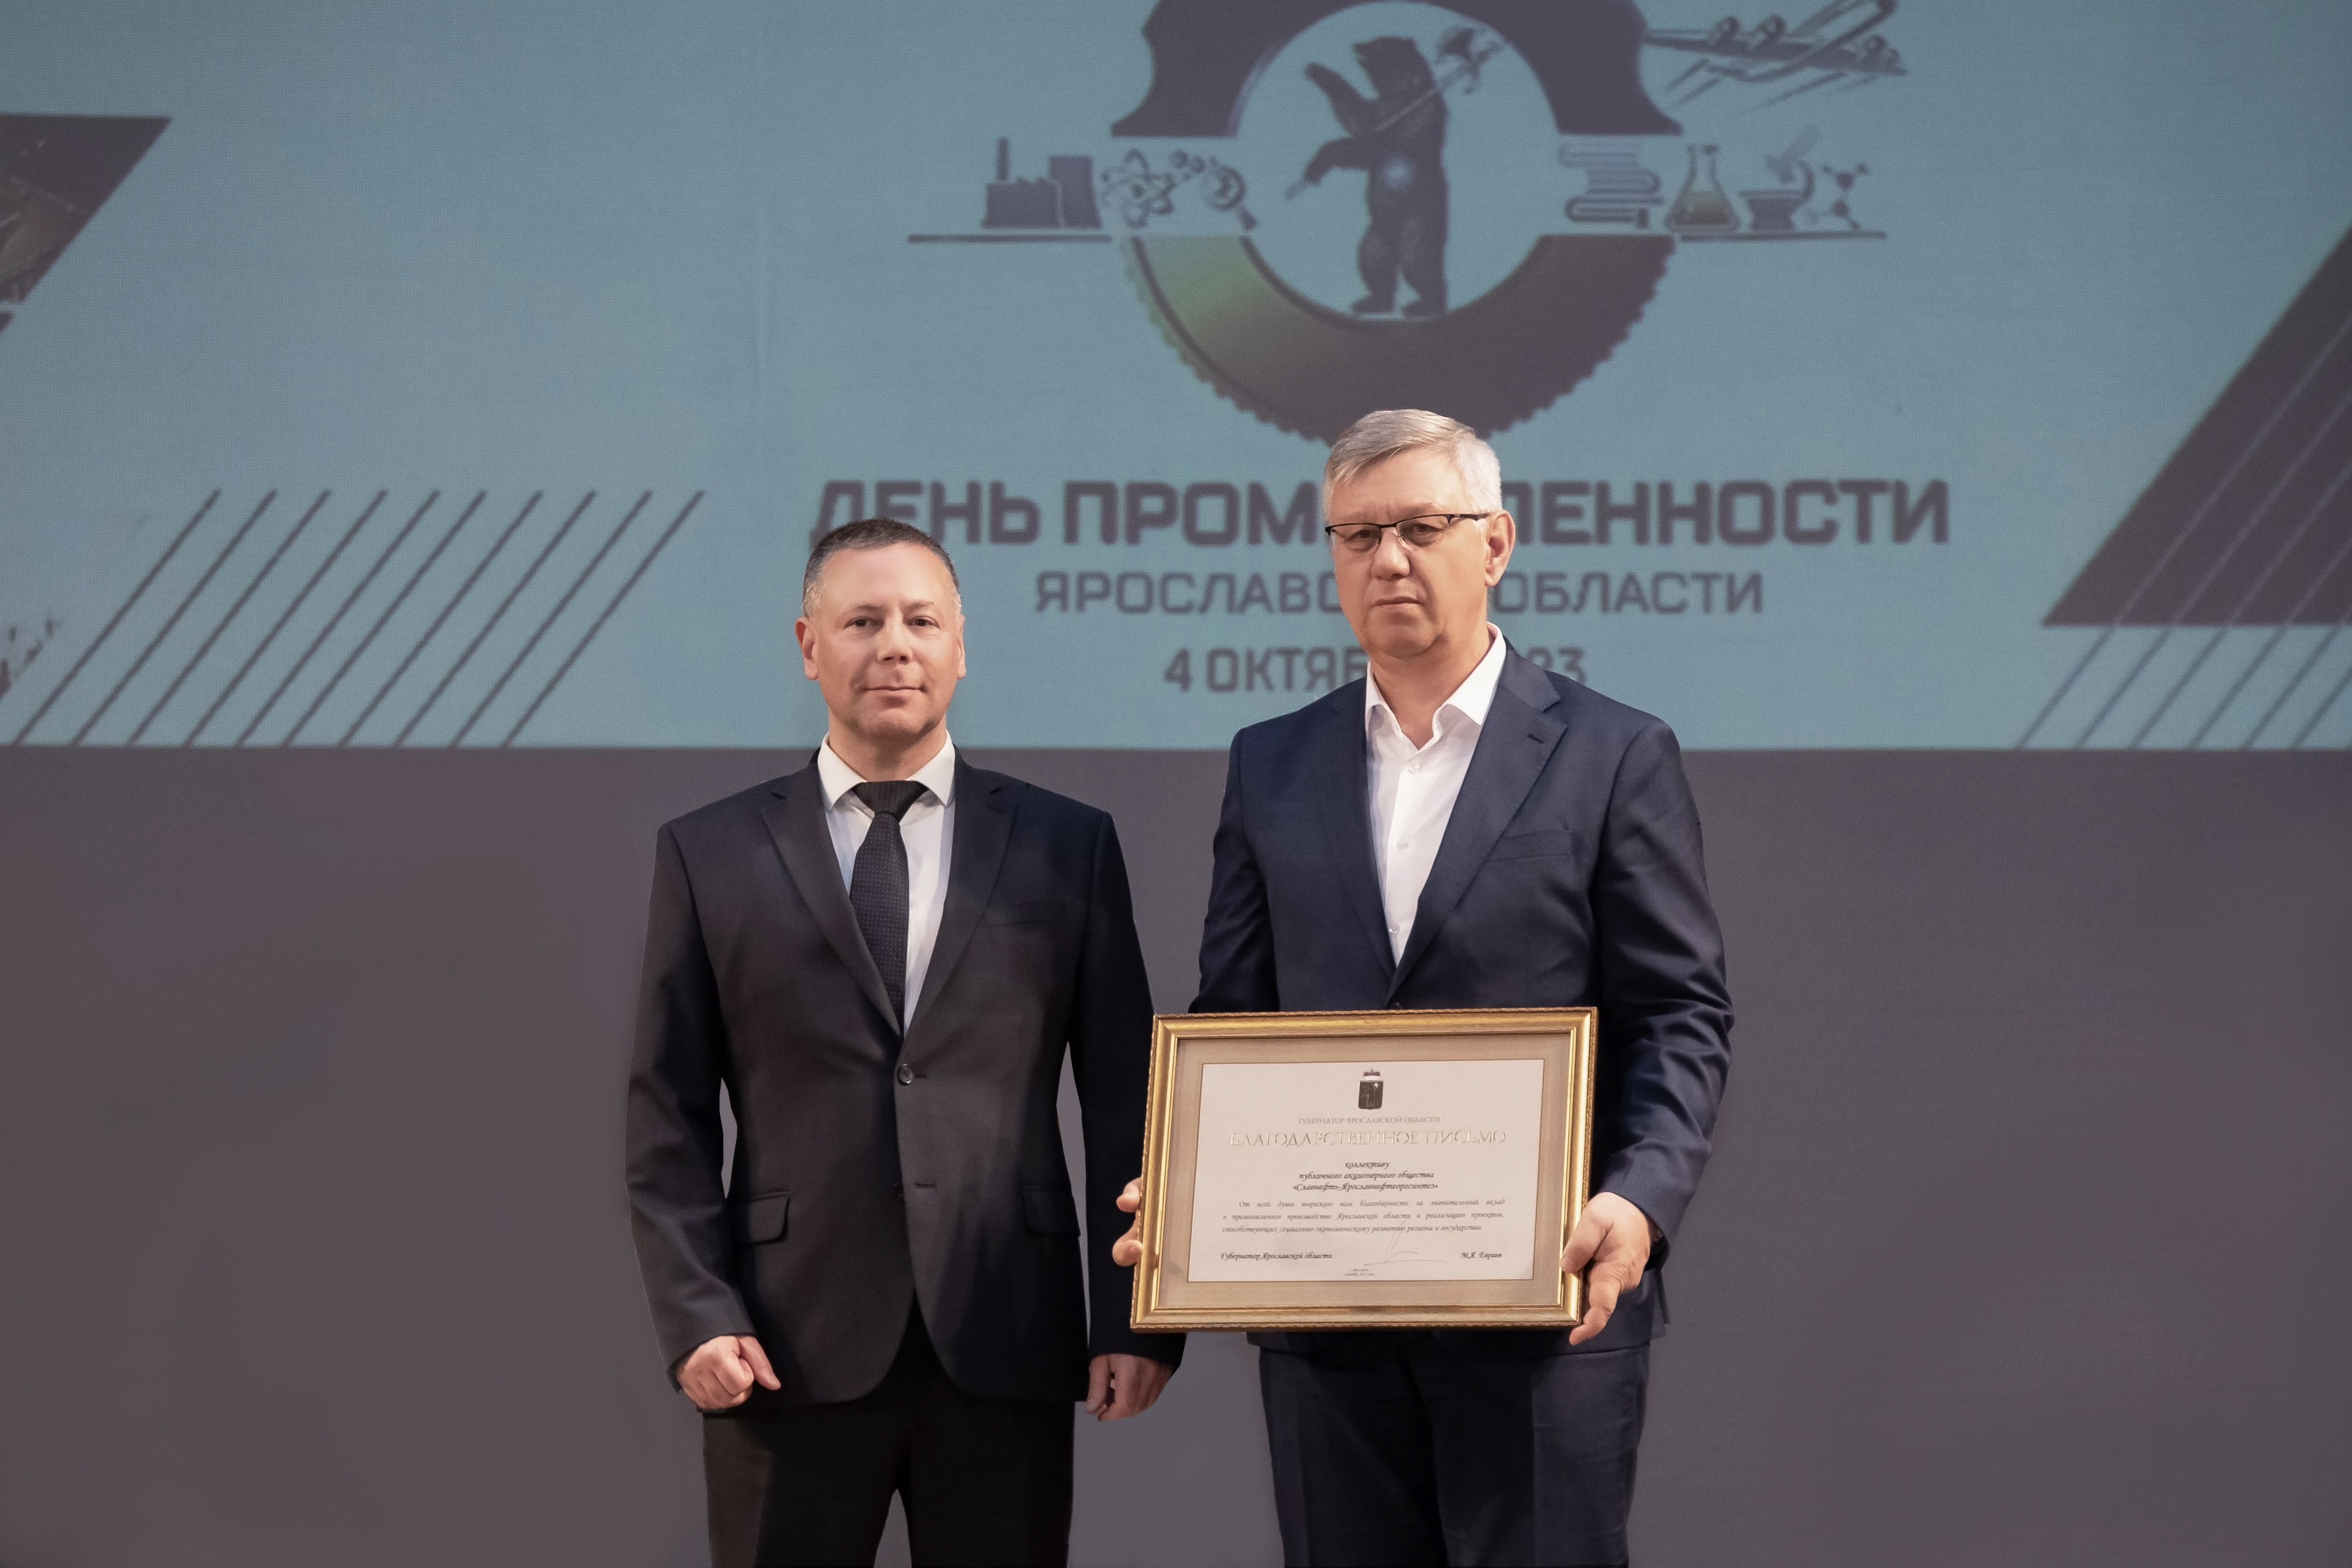 YANOS's achievements were noted on the eve of Industry Day of the Yaroslavl region